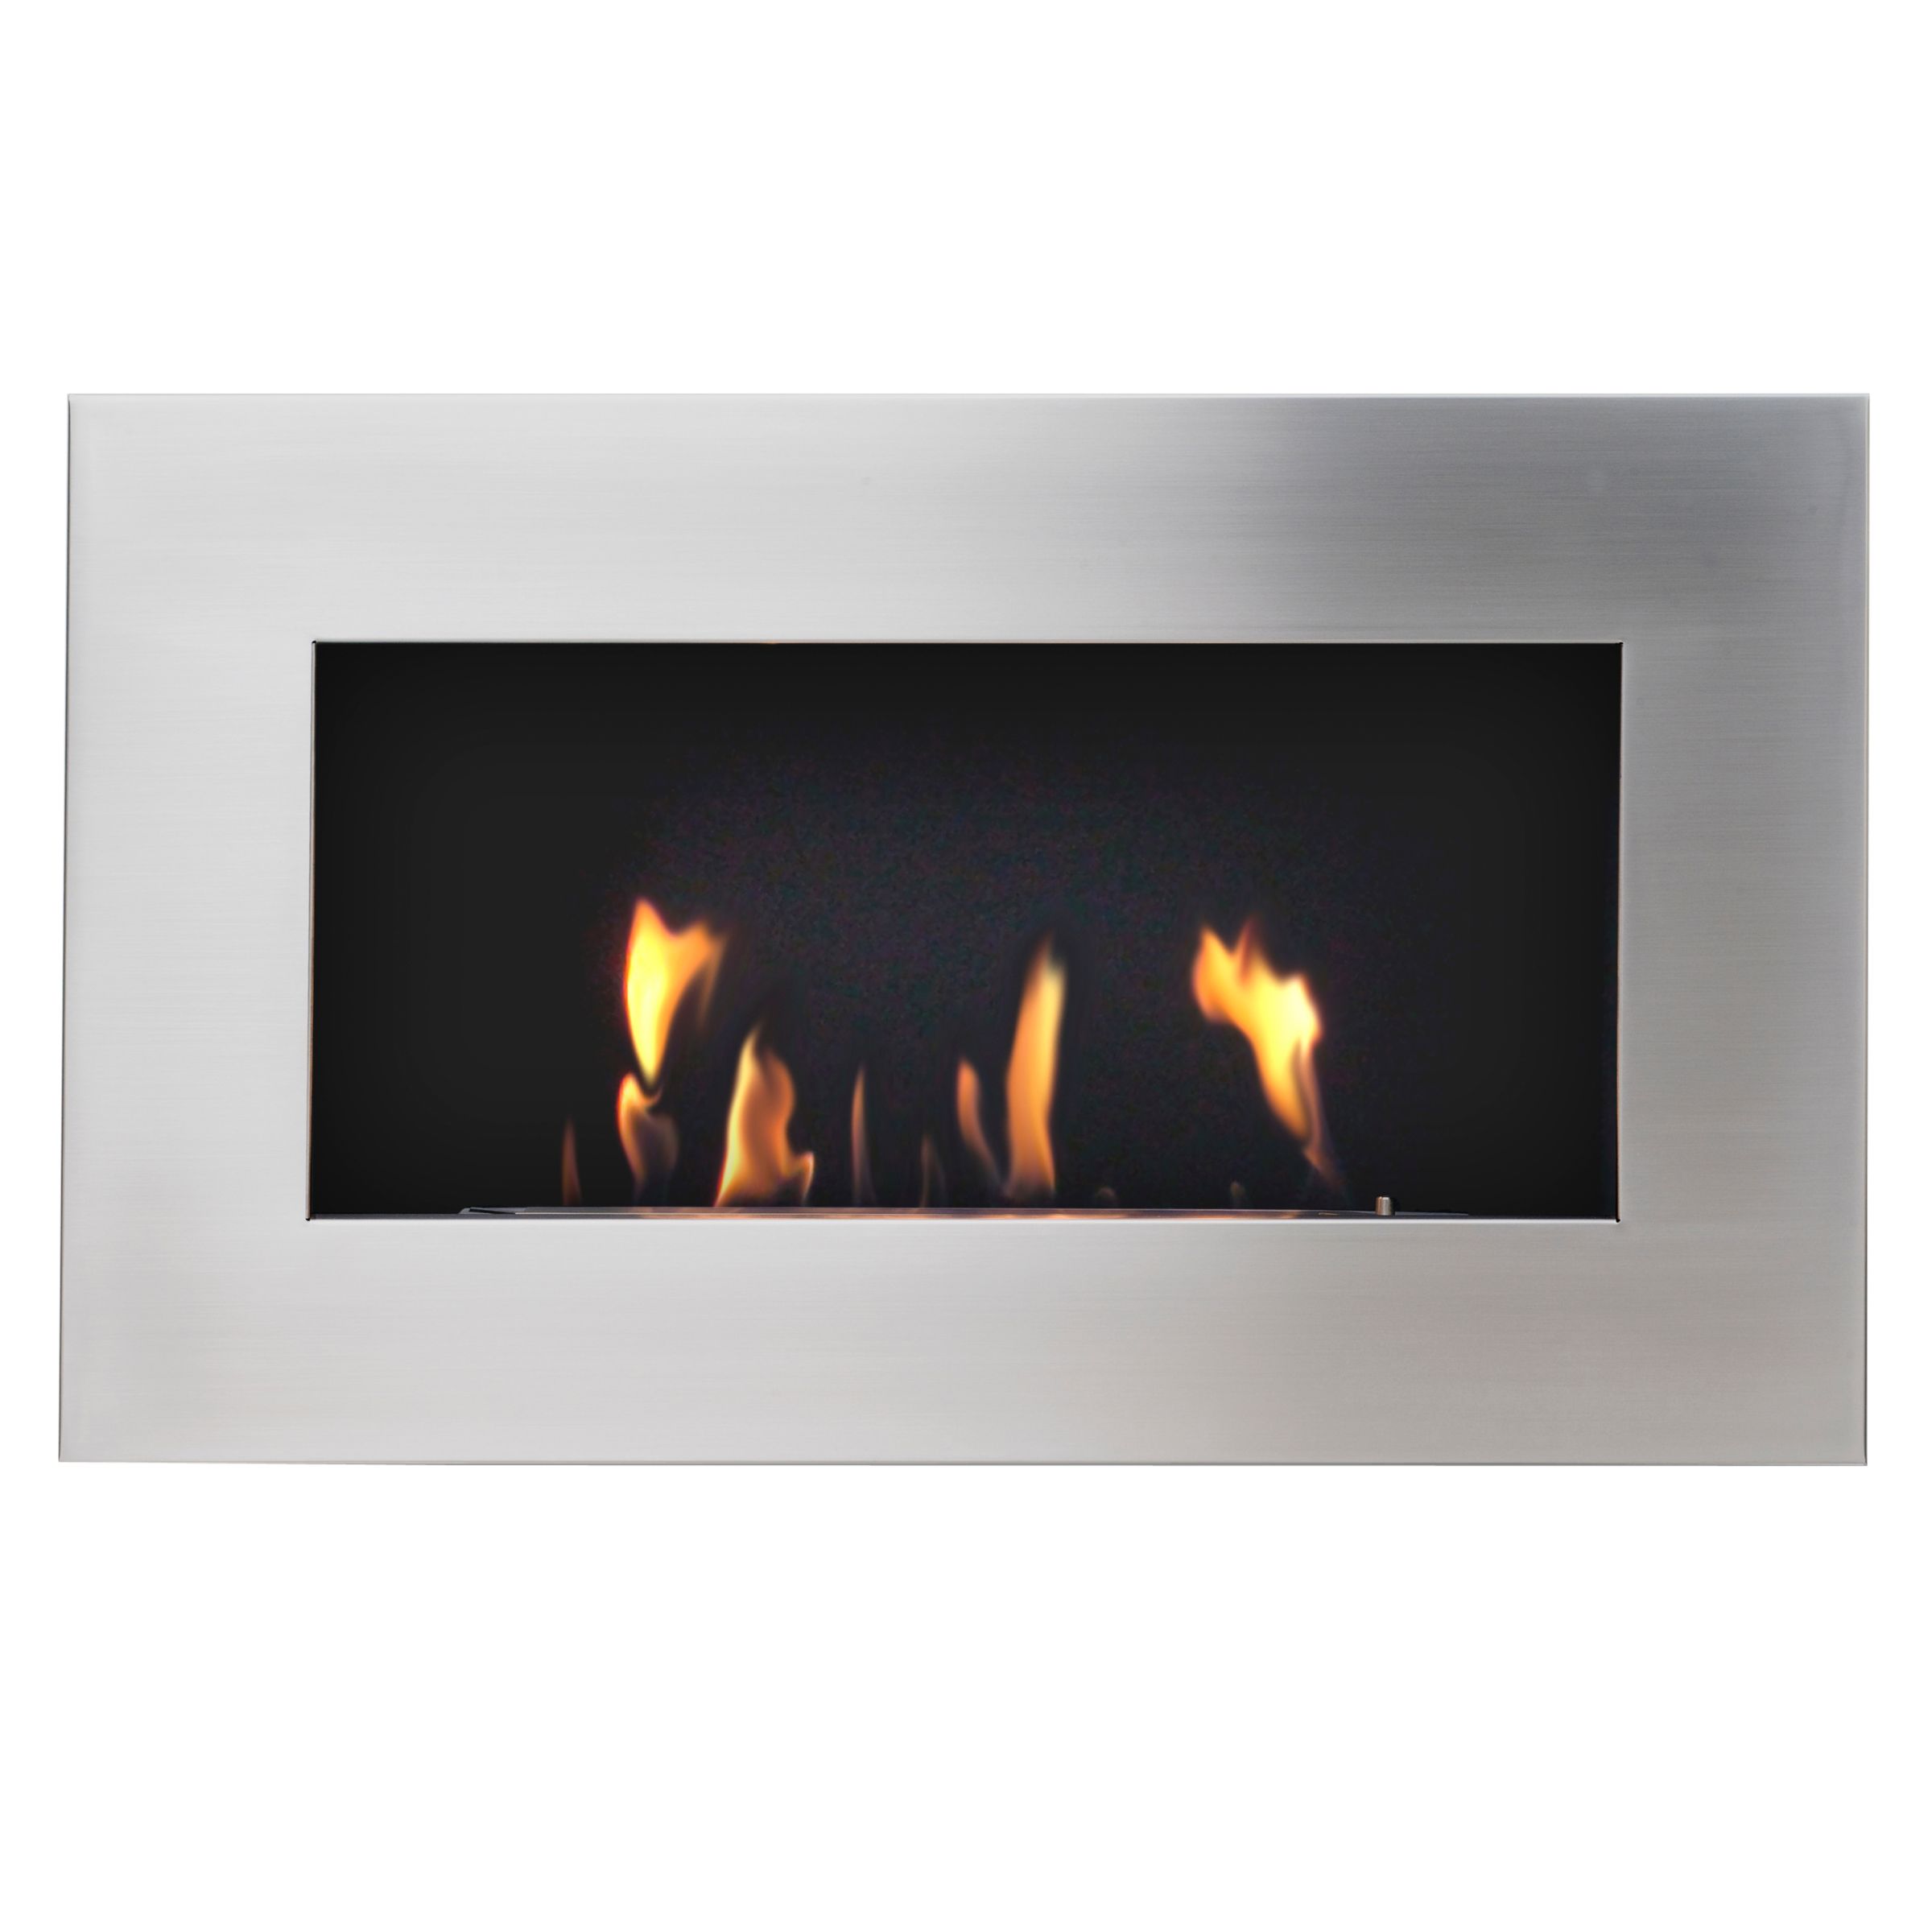 Decoflame® New York Plaza Fire, Brushed Steel at JohnLewis